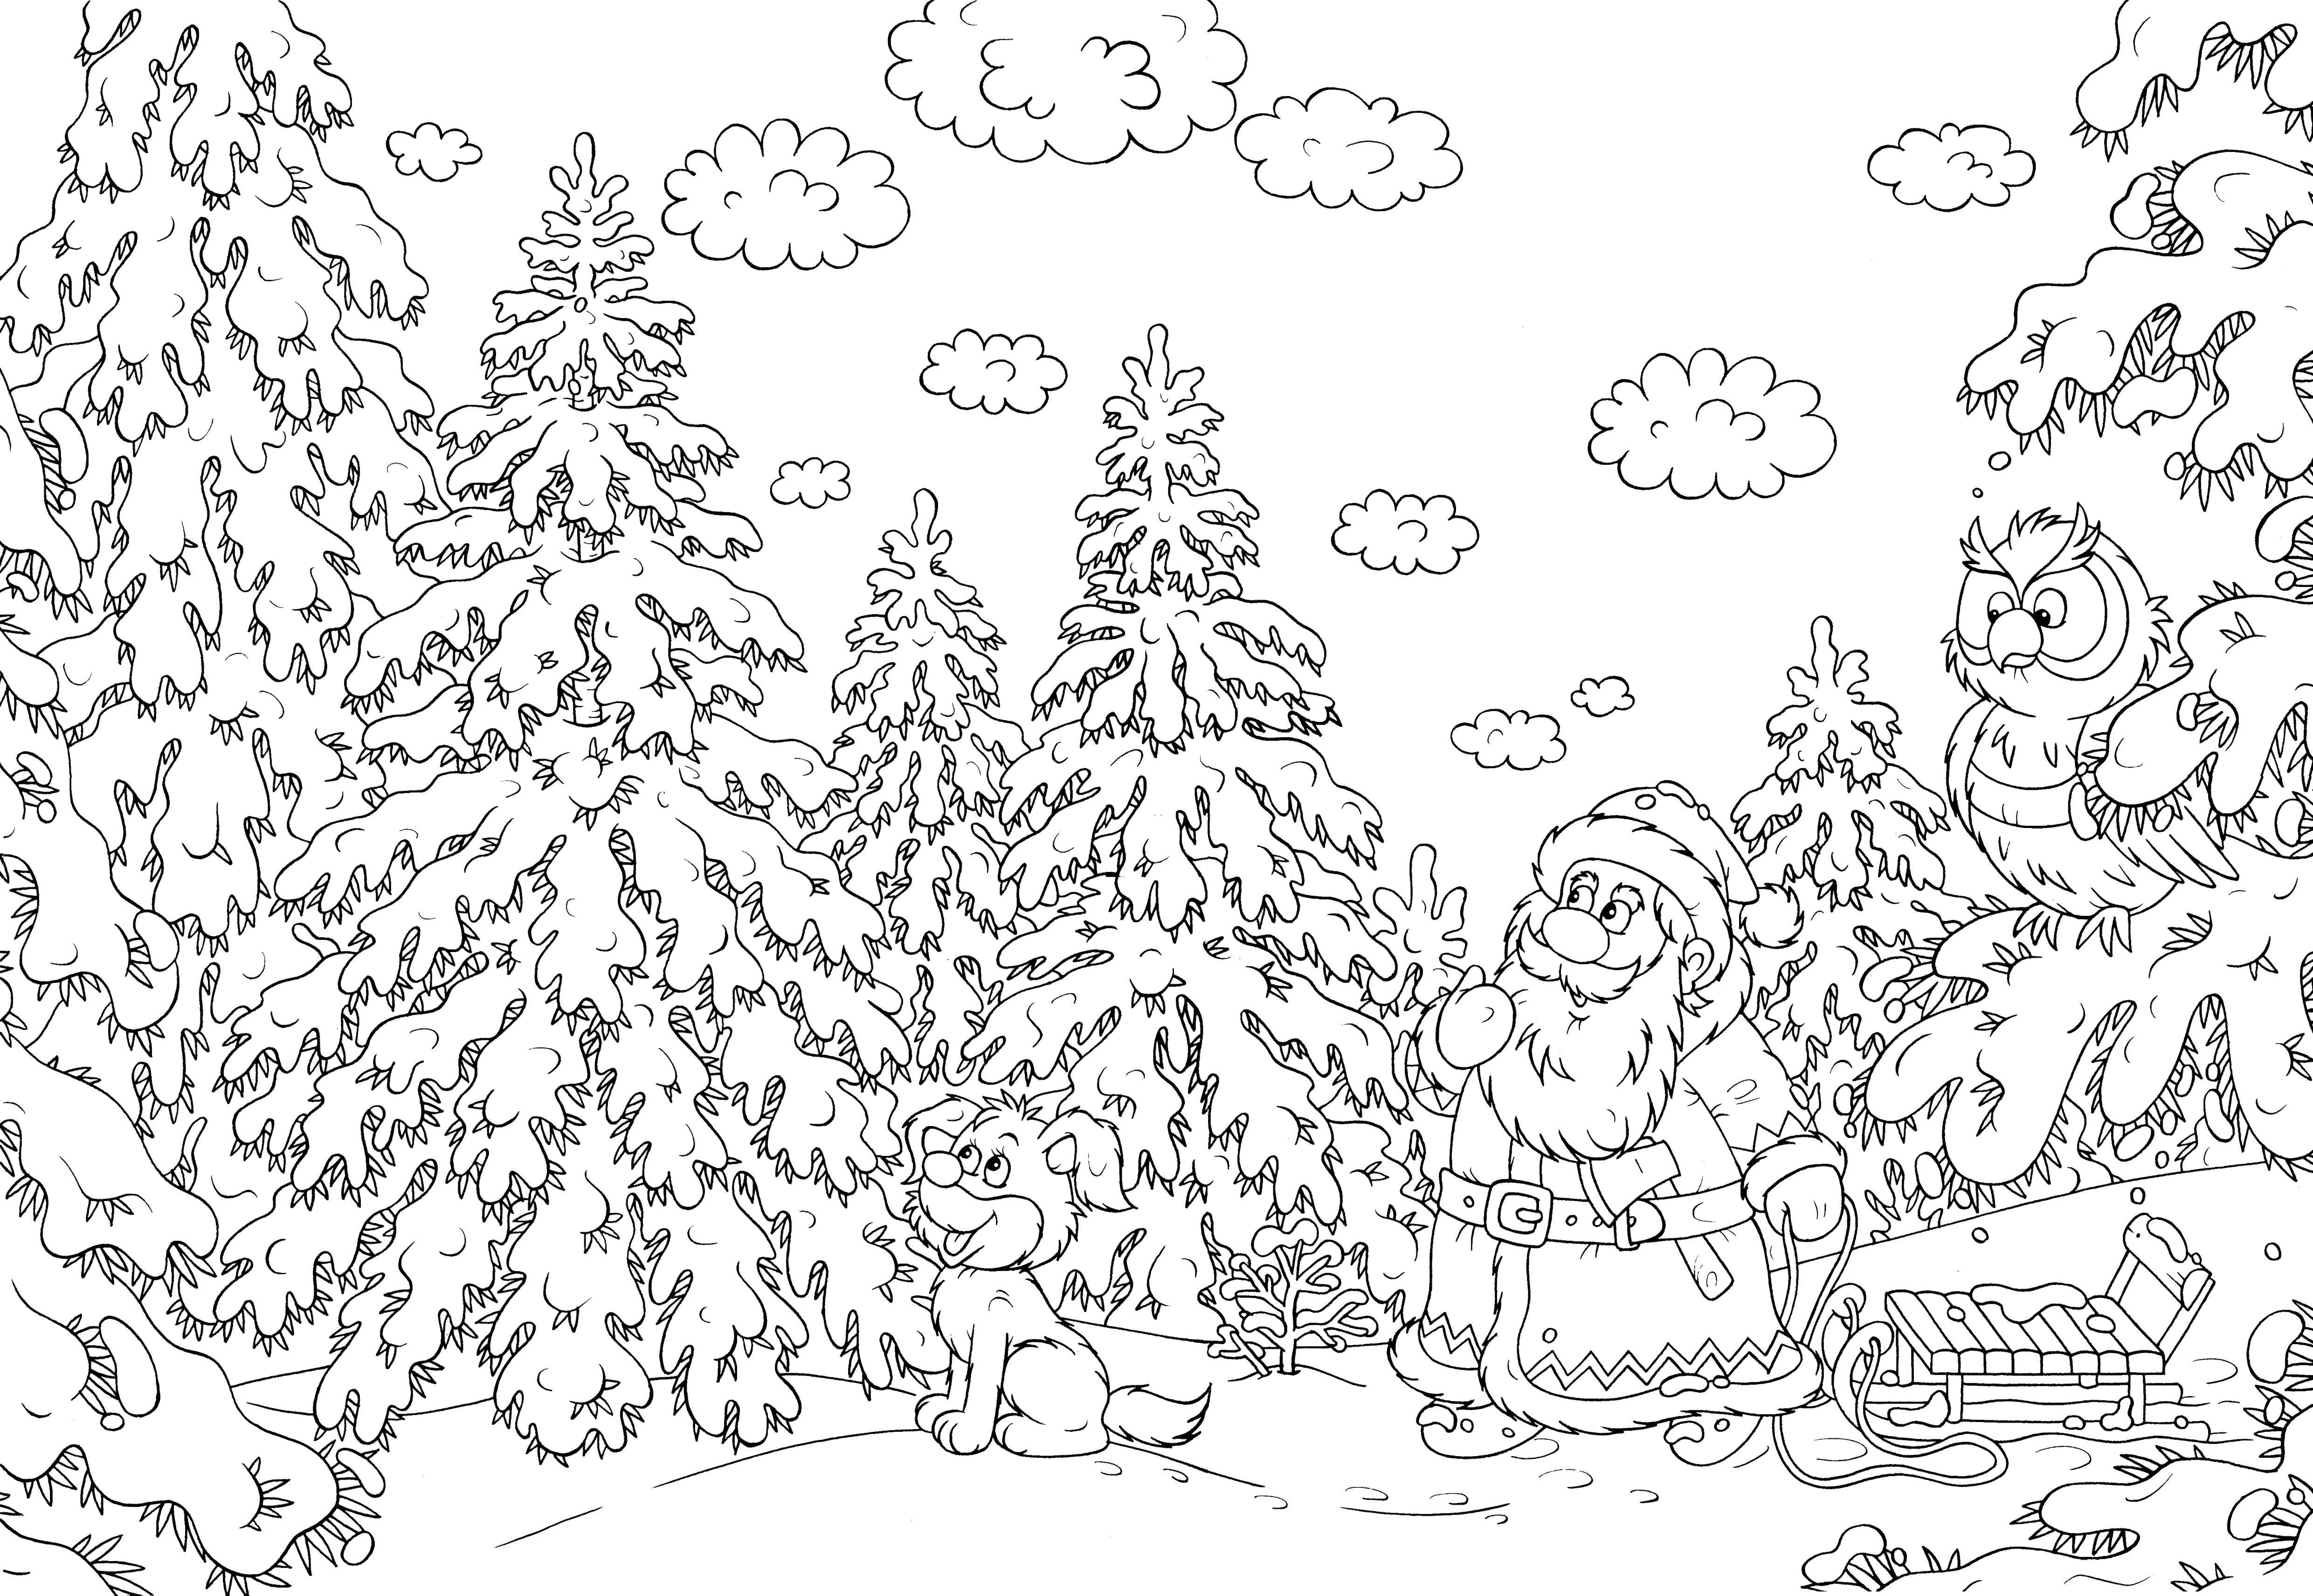 Coloring Santa Claus with sleigh in the woods. Category new year. Tags:  new year, Christmas tree, Santa Claus.